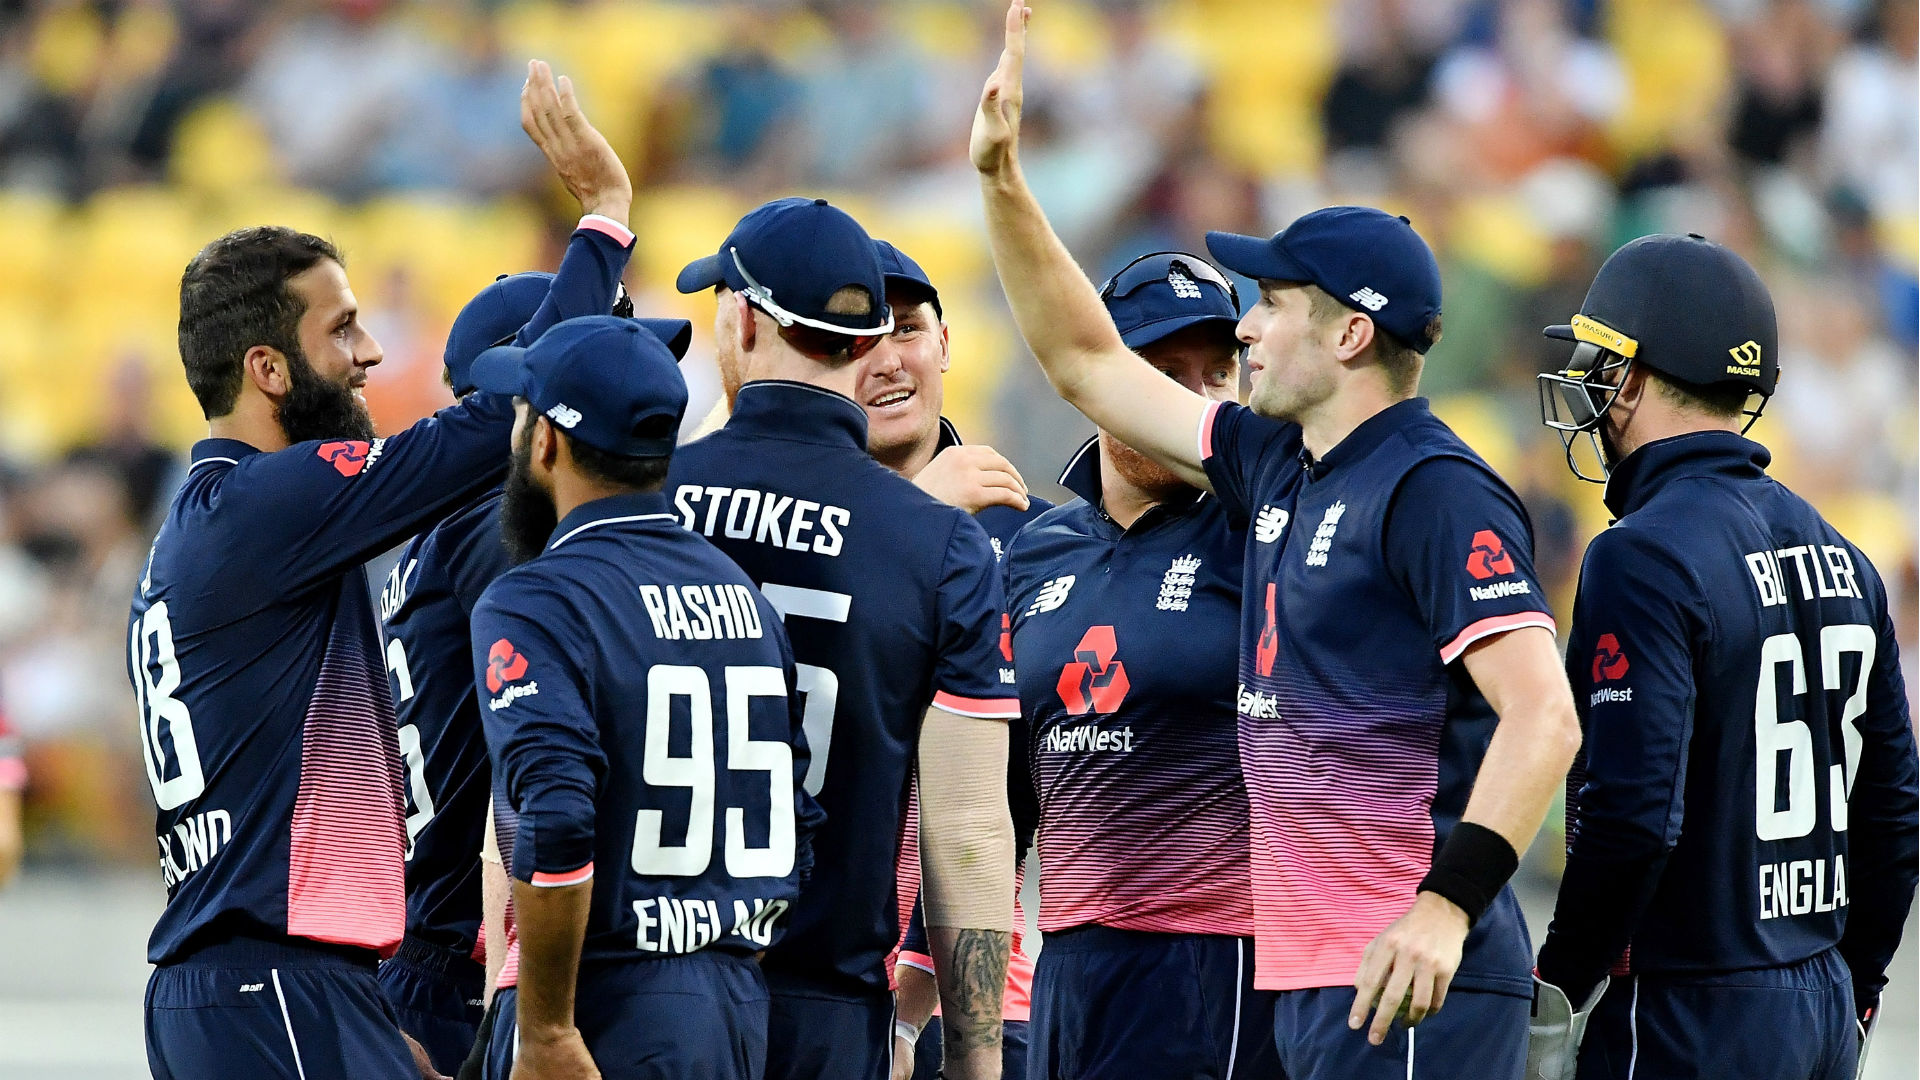 England World Cup Cricket Team Images Hd - HD Wallpaper 